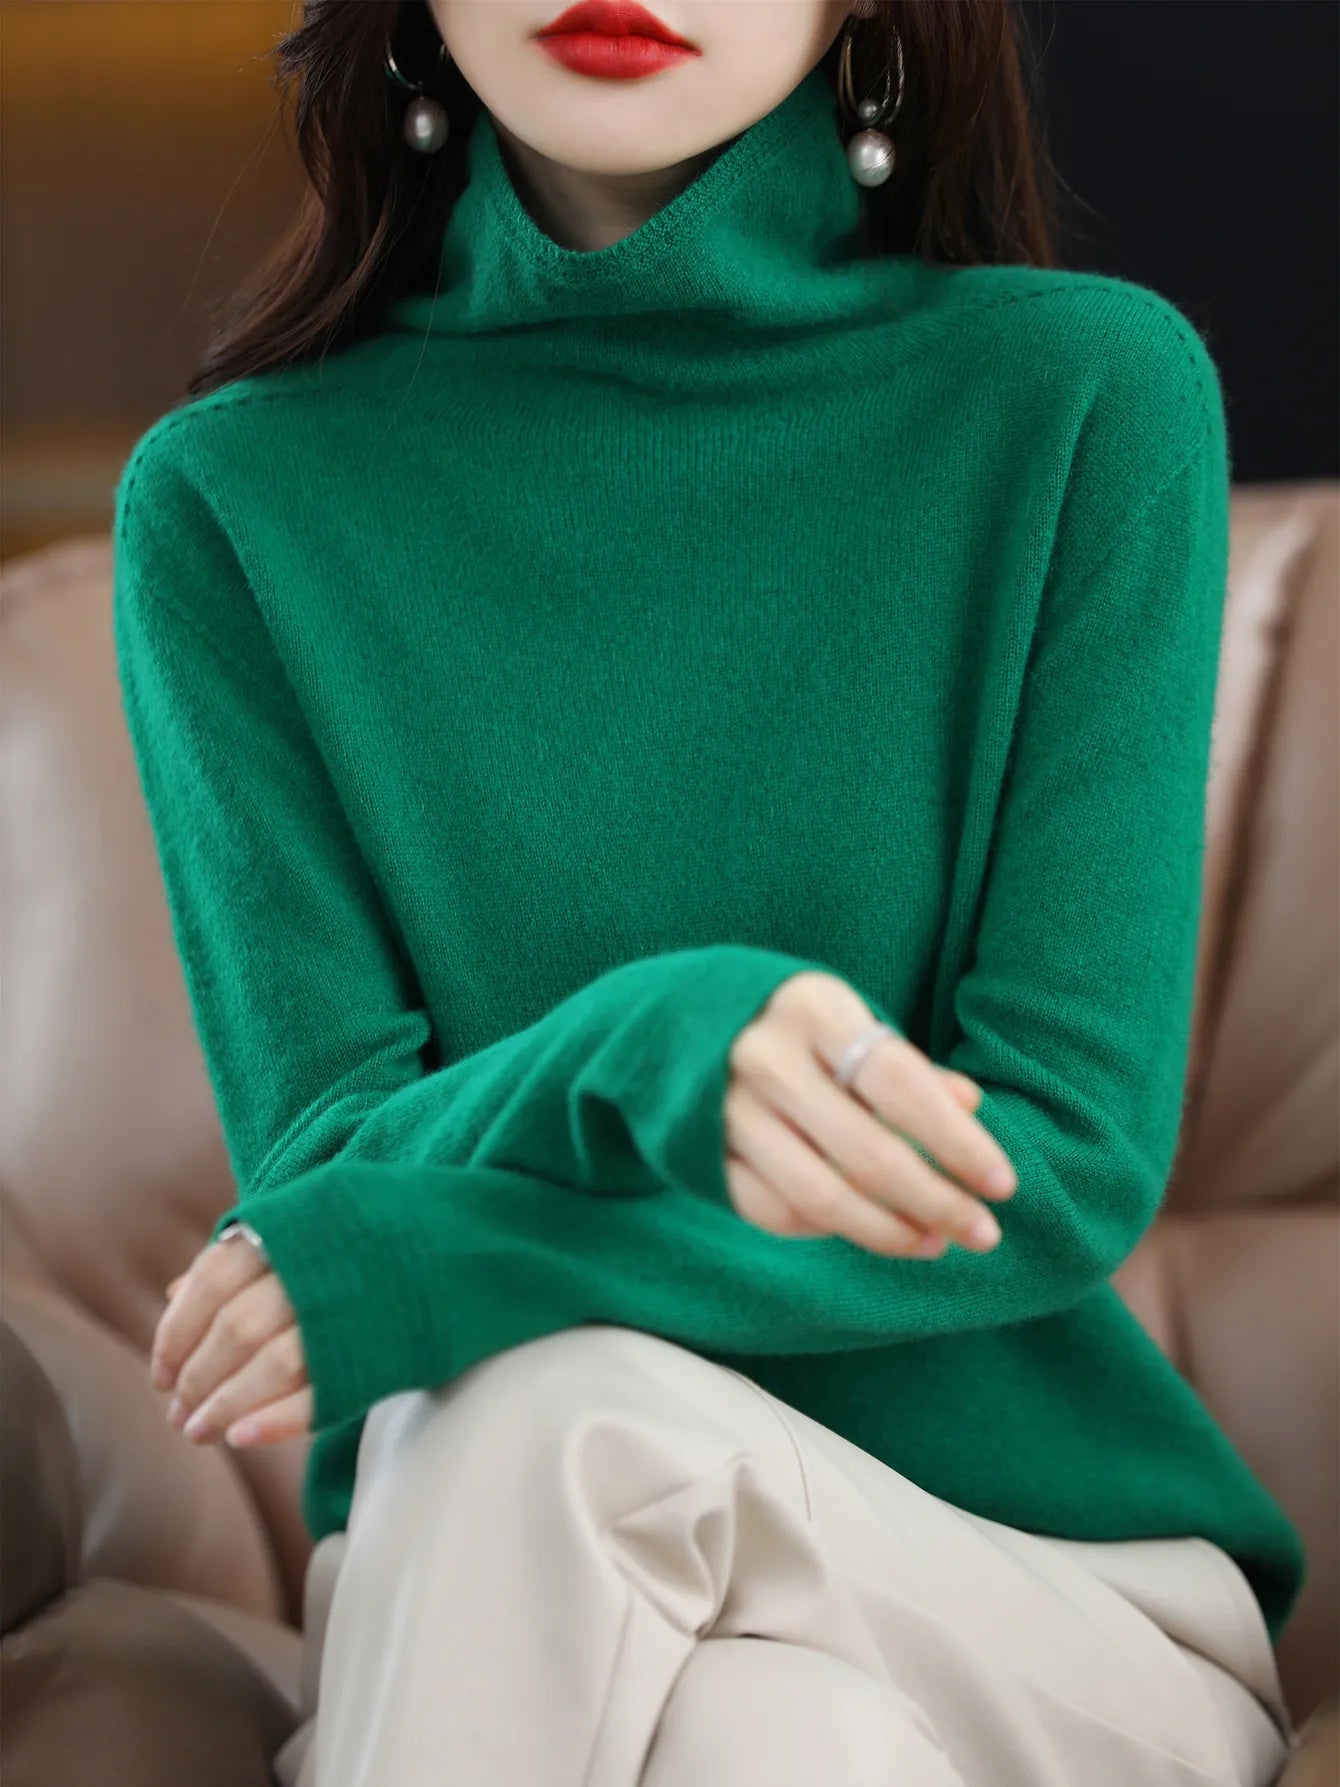 Turtleneck Sweater 100% Merino Wool Sweater Women 2023 Fall Winter Basic Soft Warm Pullovers Long Sleeve Knit Top Female Clothes